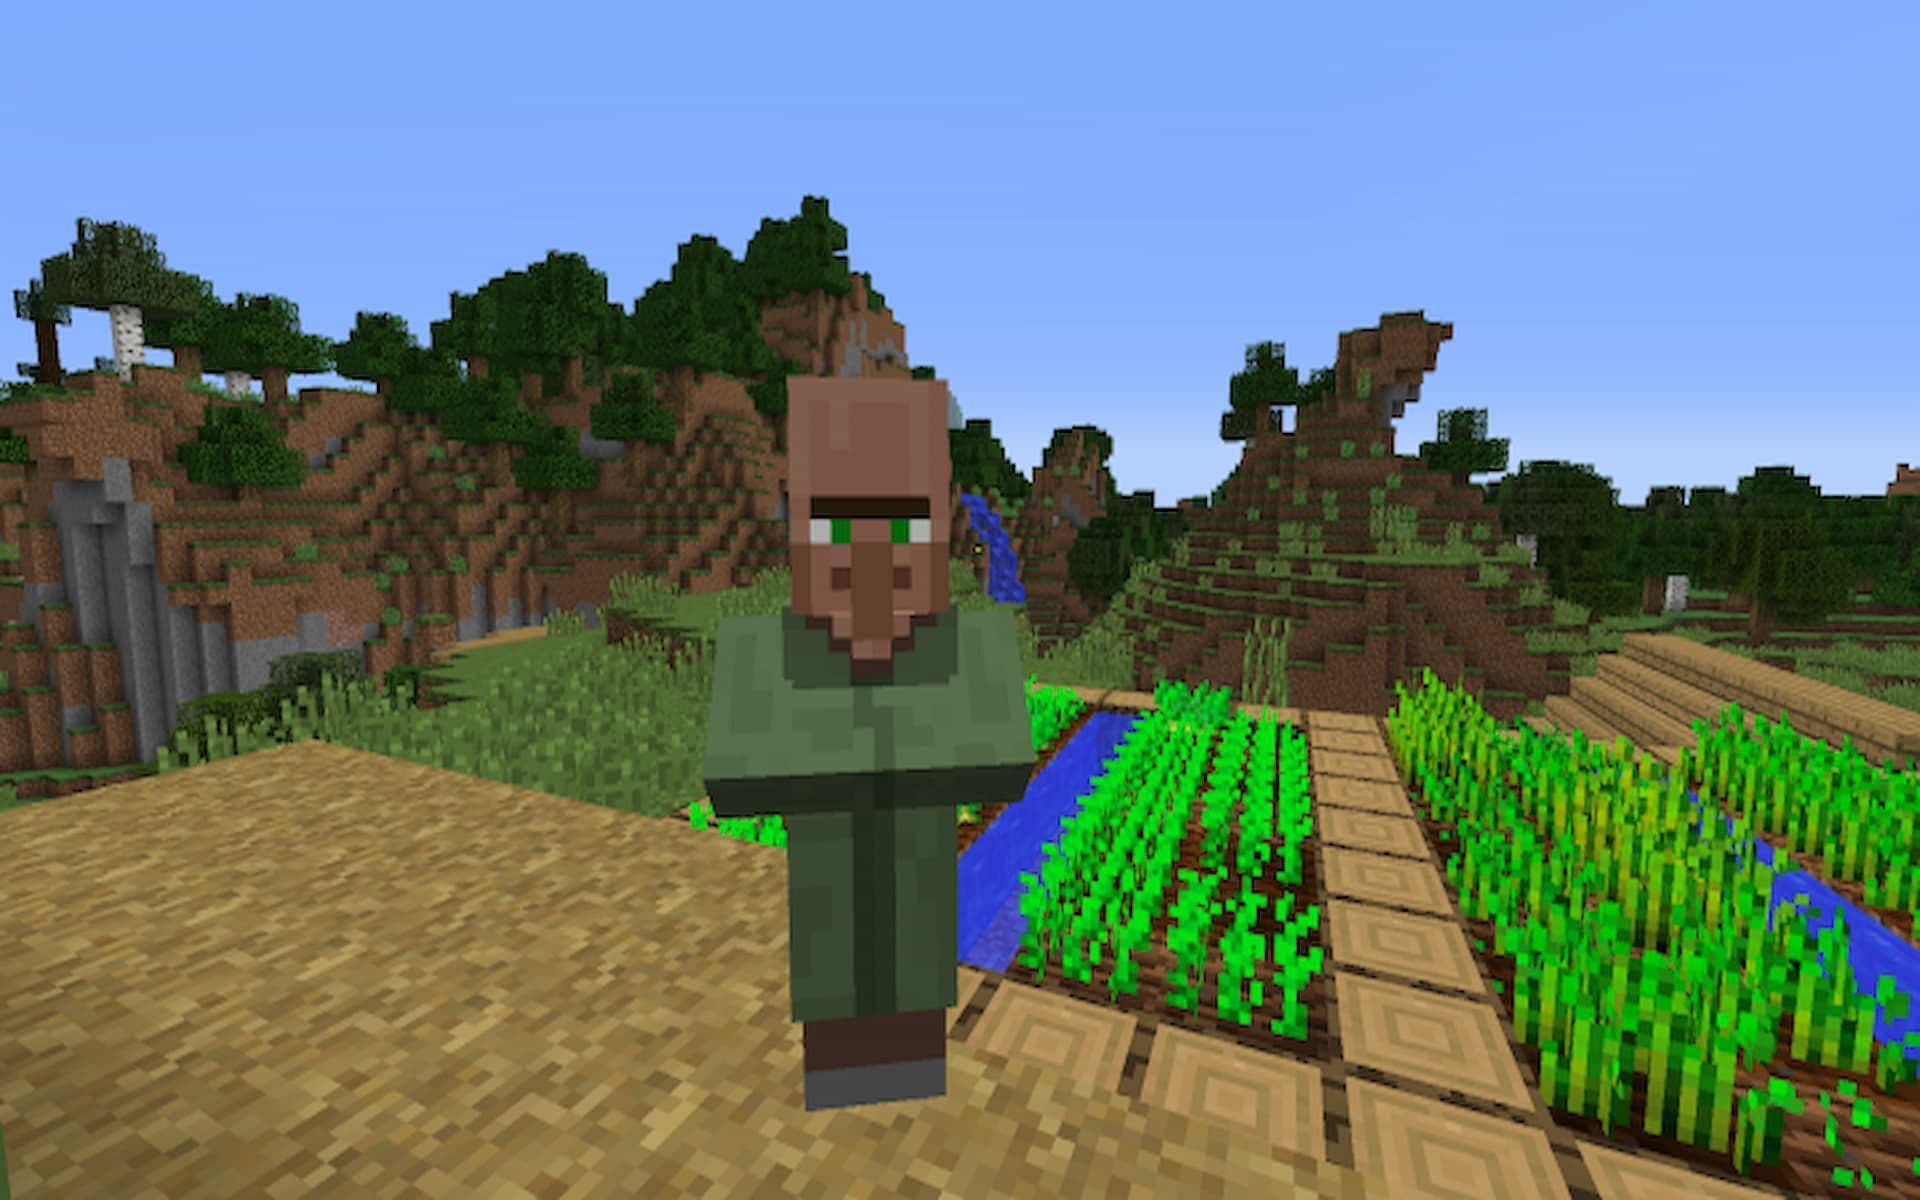 Nitwits have a few uses in Minecraft (Image via Planet Minecraft)